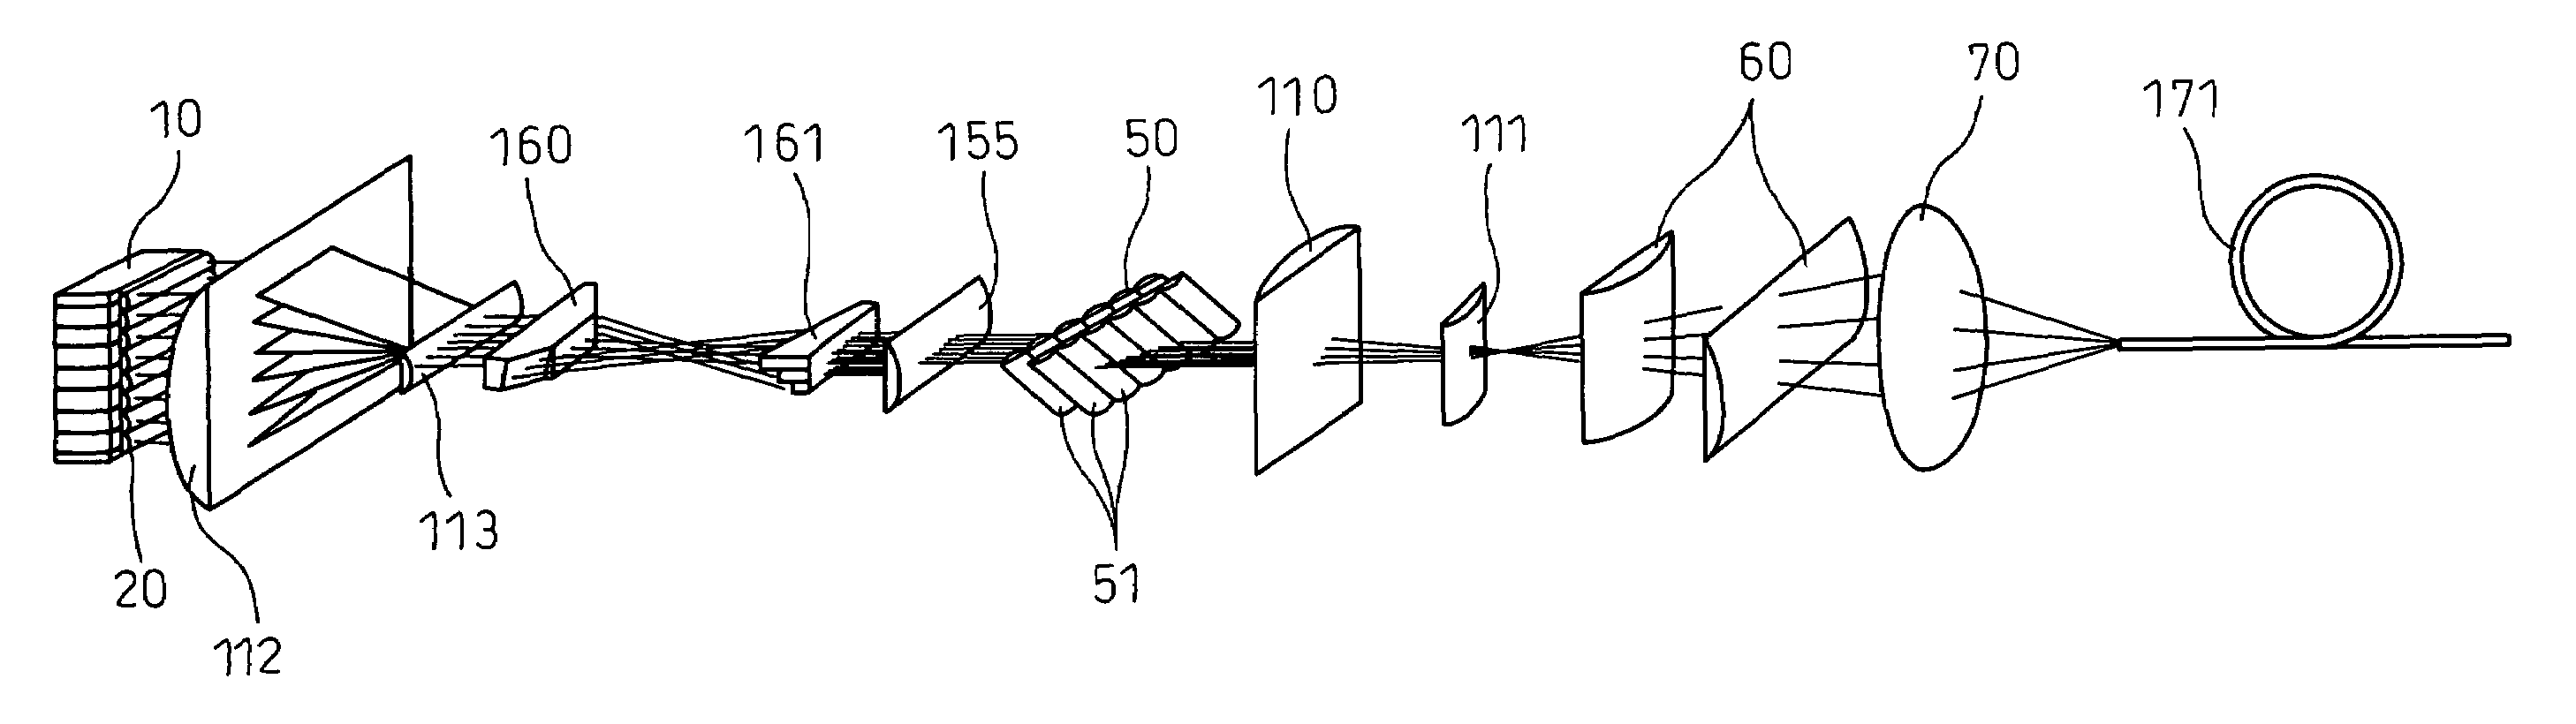 Semiconductor laser apparatus capable of routing laser beams emitted from stacked-array laser diode to optical fiber with little loss